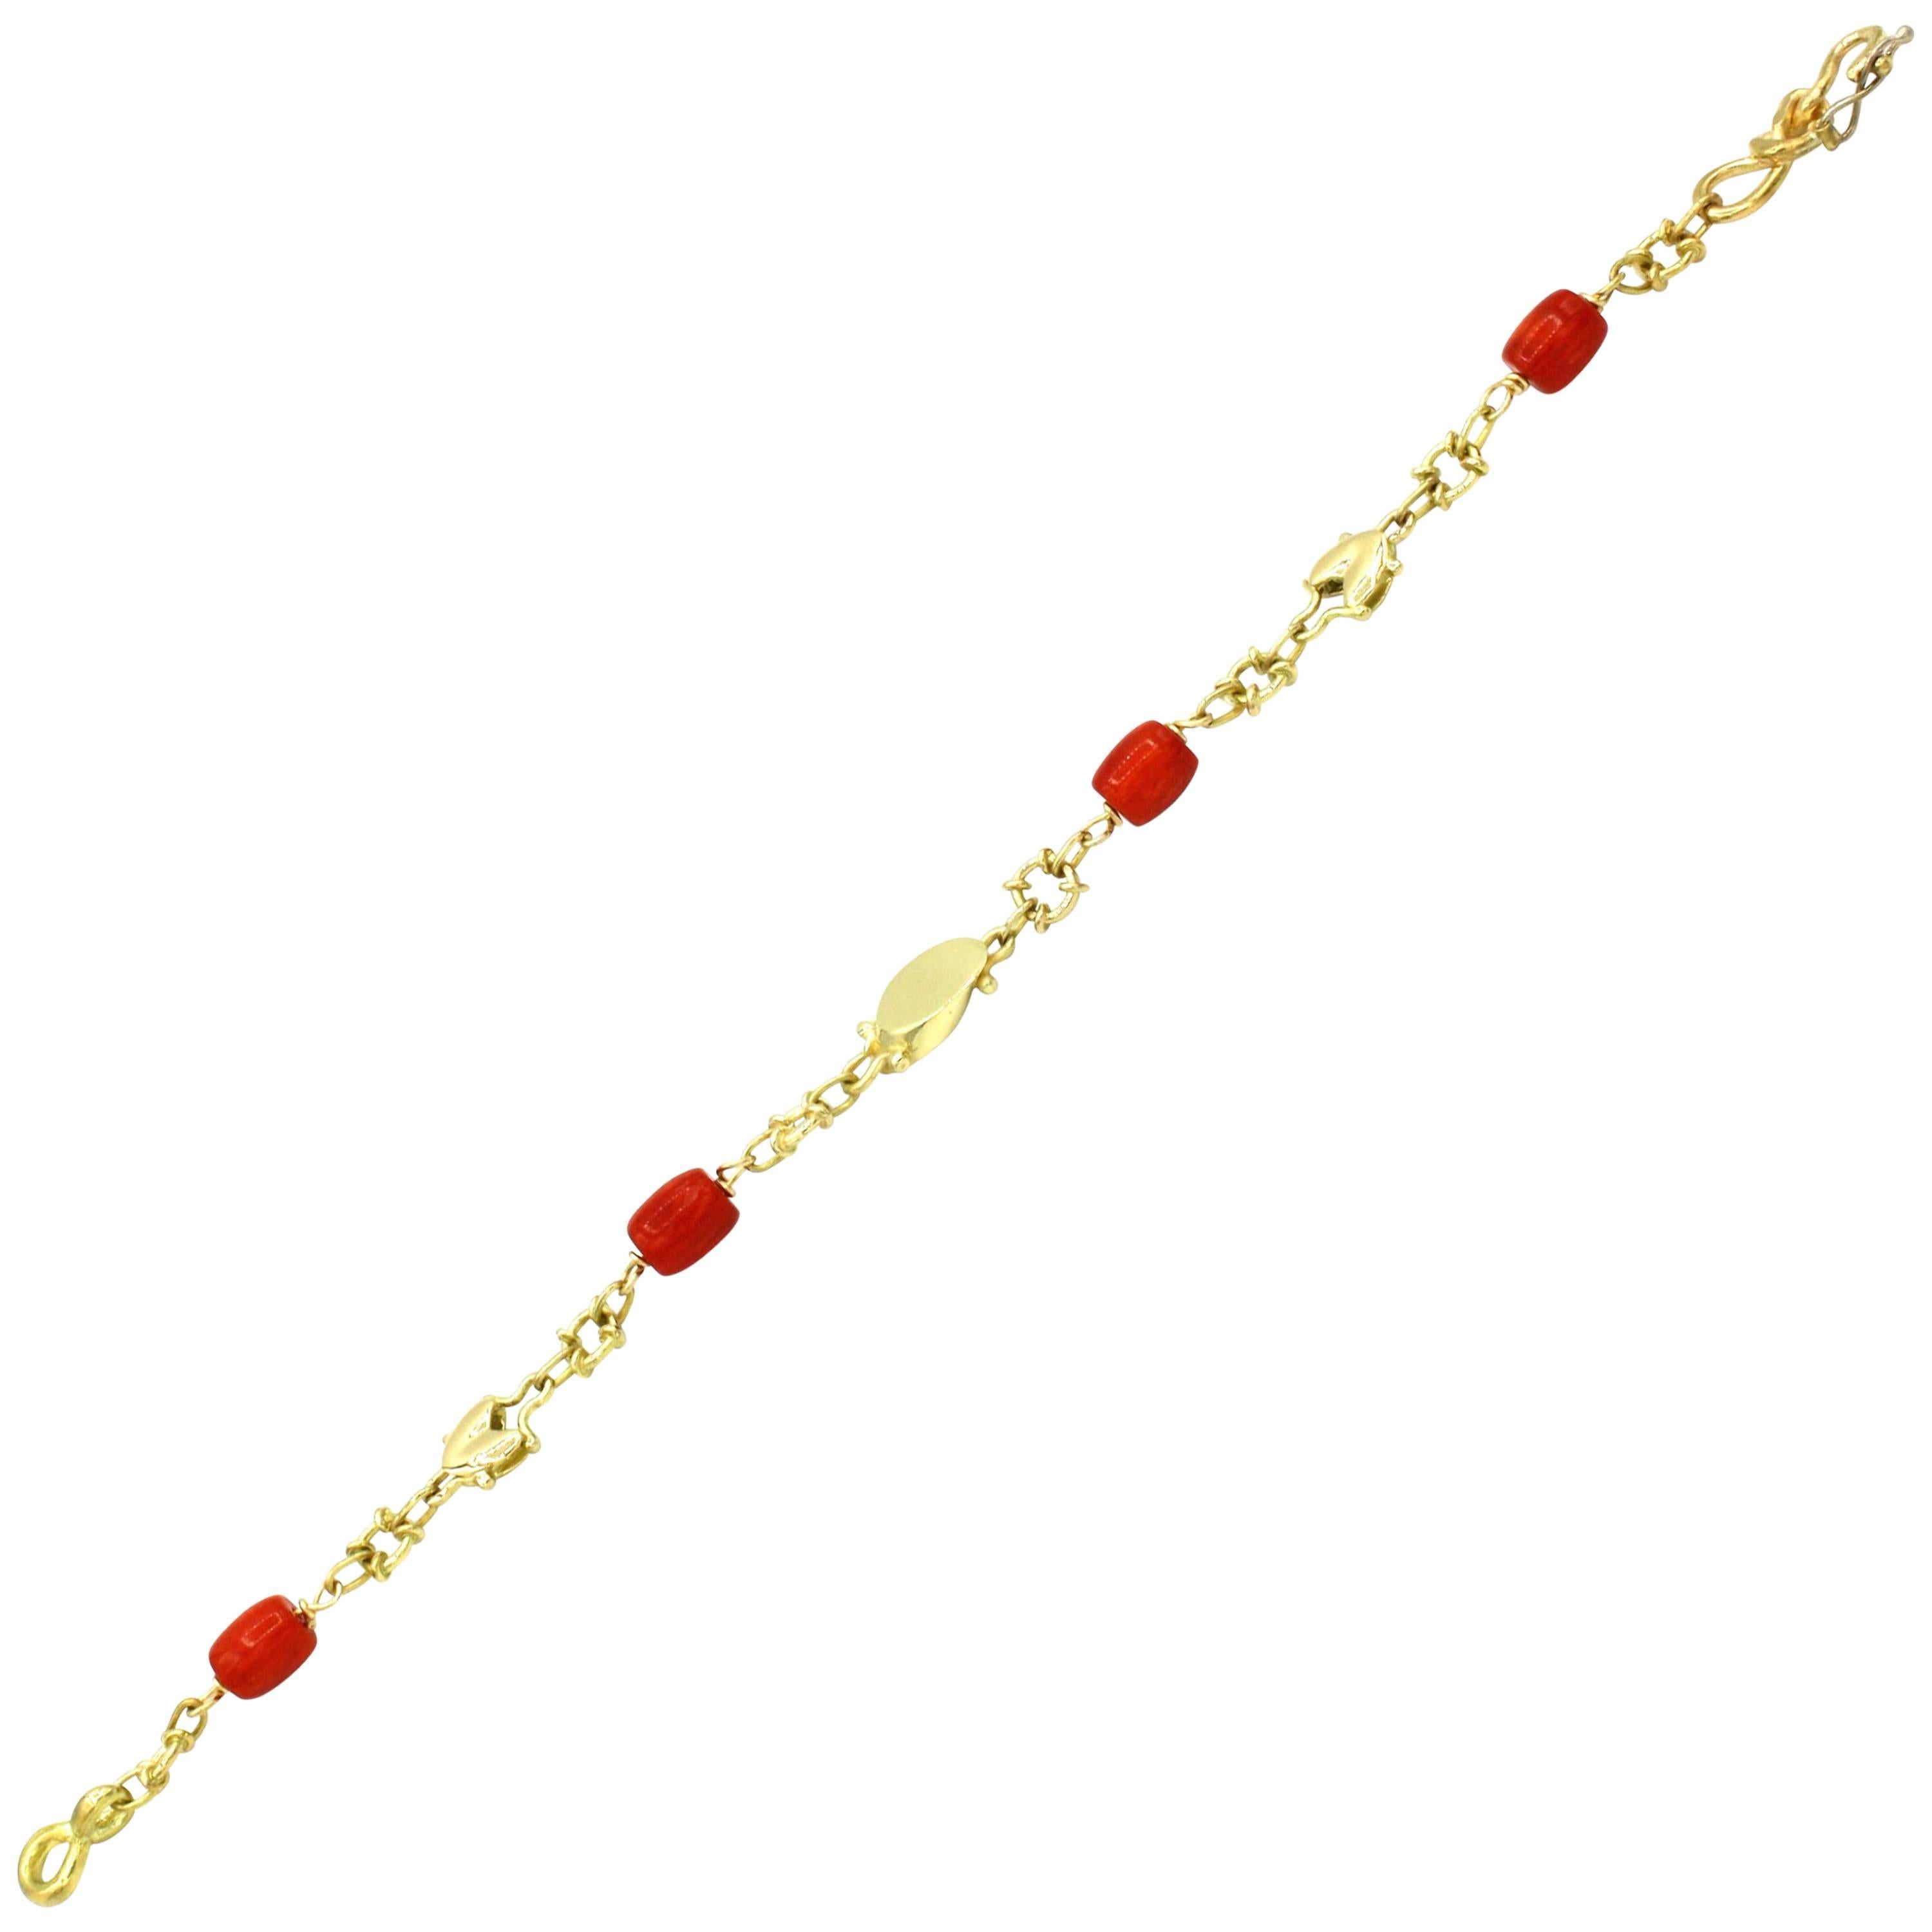 This lovely 18 kt gold bracelet has refined pieces of red coral along with a variety of elaborate links.  The style is unique with a hook and latch clasp, adding design detail to the piece.  A classic piece from Renato Cipullo's 